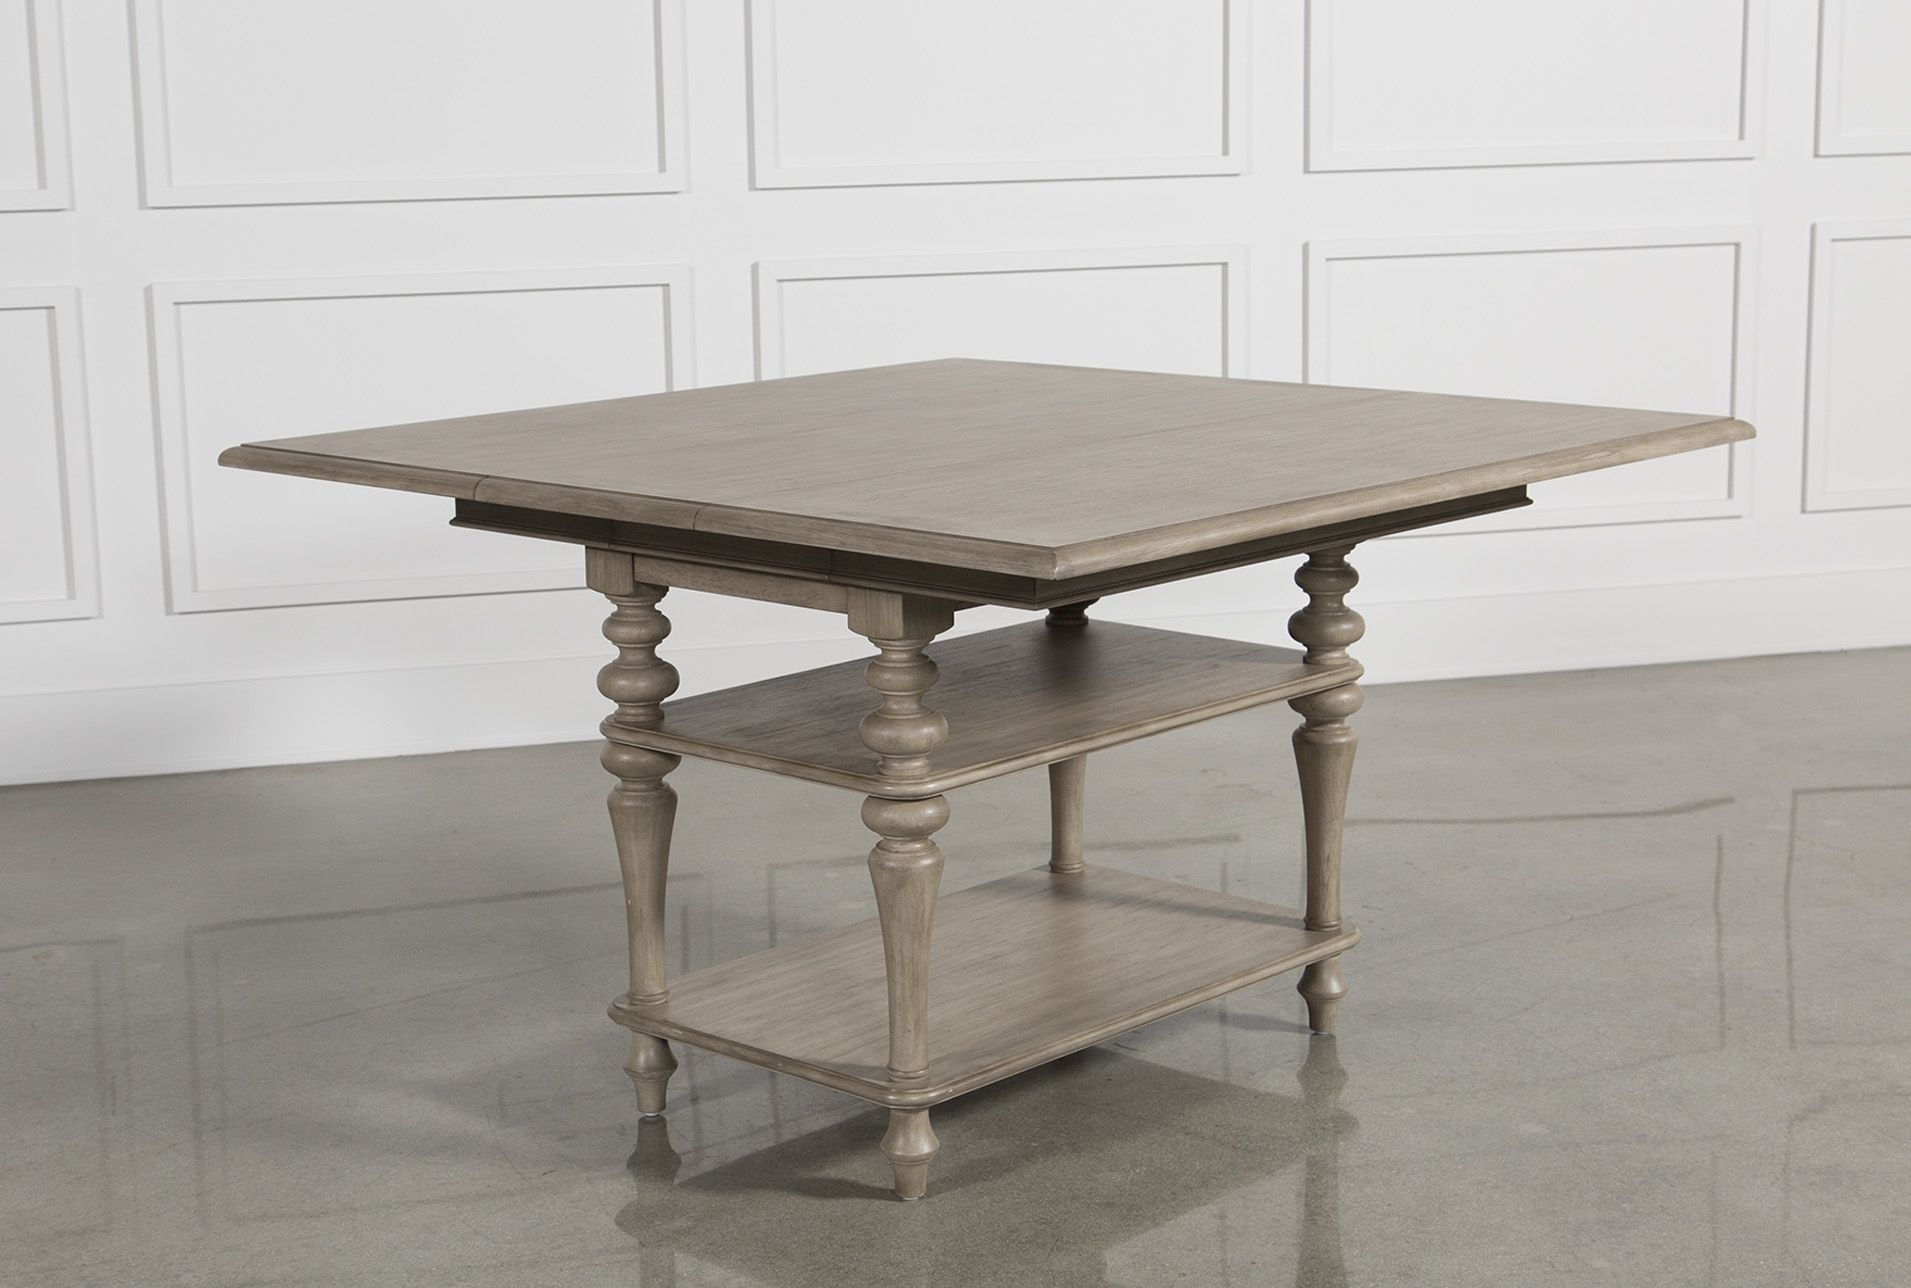 Caira Extension Counter Table | Products With Regard To Most Recently Released Caira Extension Pedestal Dining Tables (View 3 of 20)